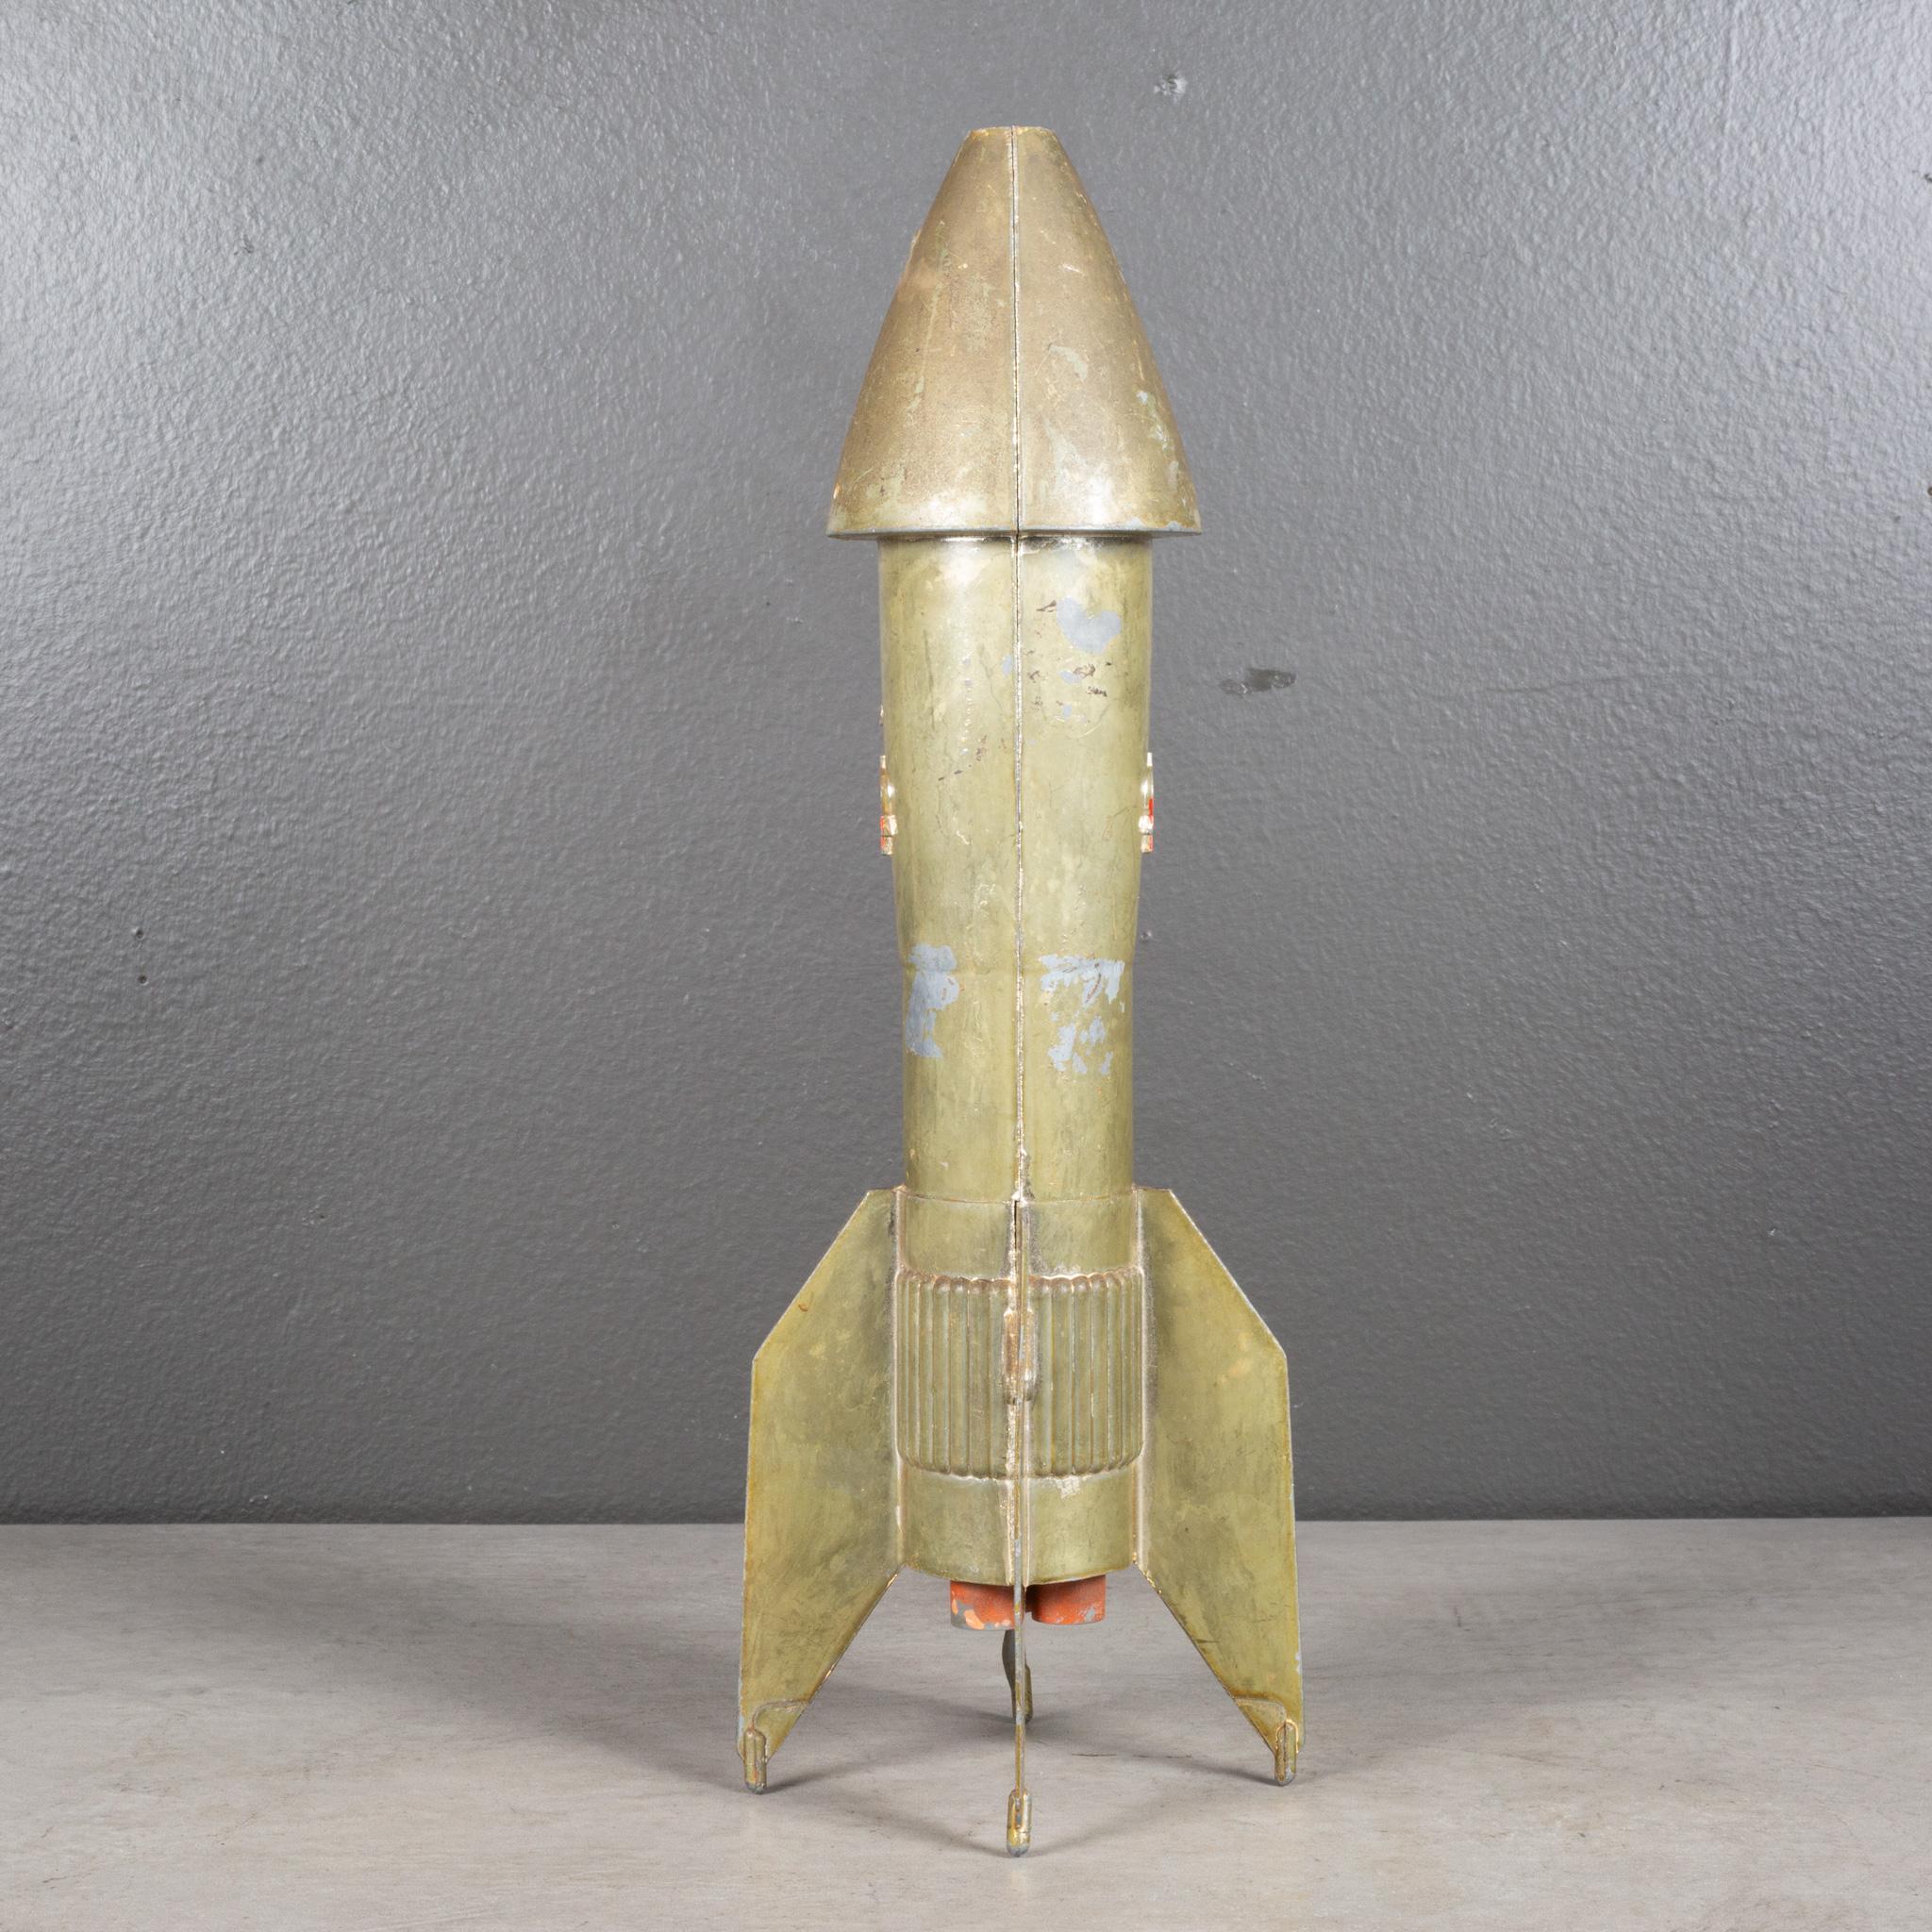 Industrial Vintage Astro Rocket Ship Savings Bank c.1957  (FREE SHIPPING) For Sale